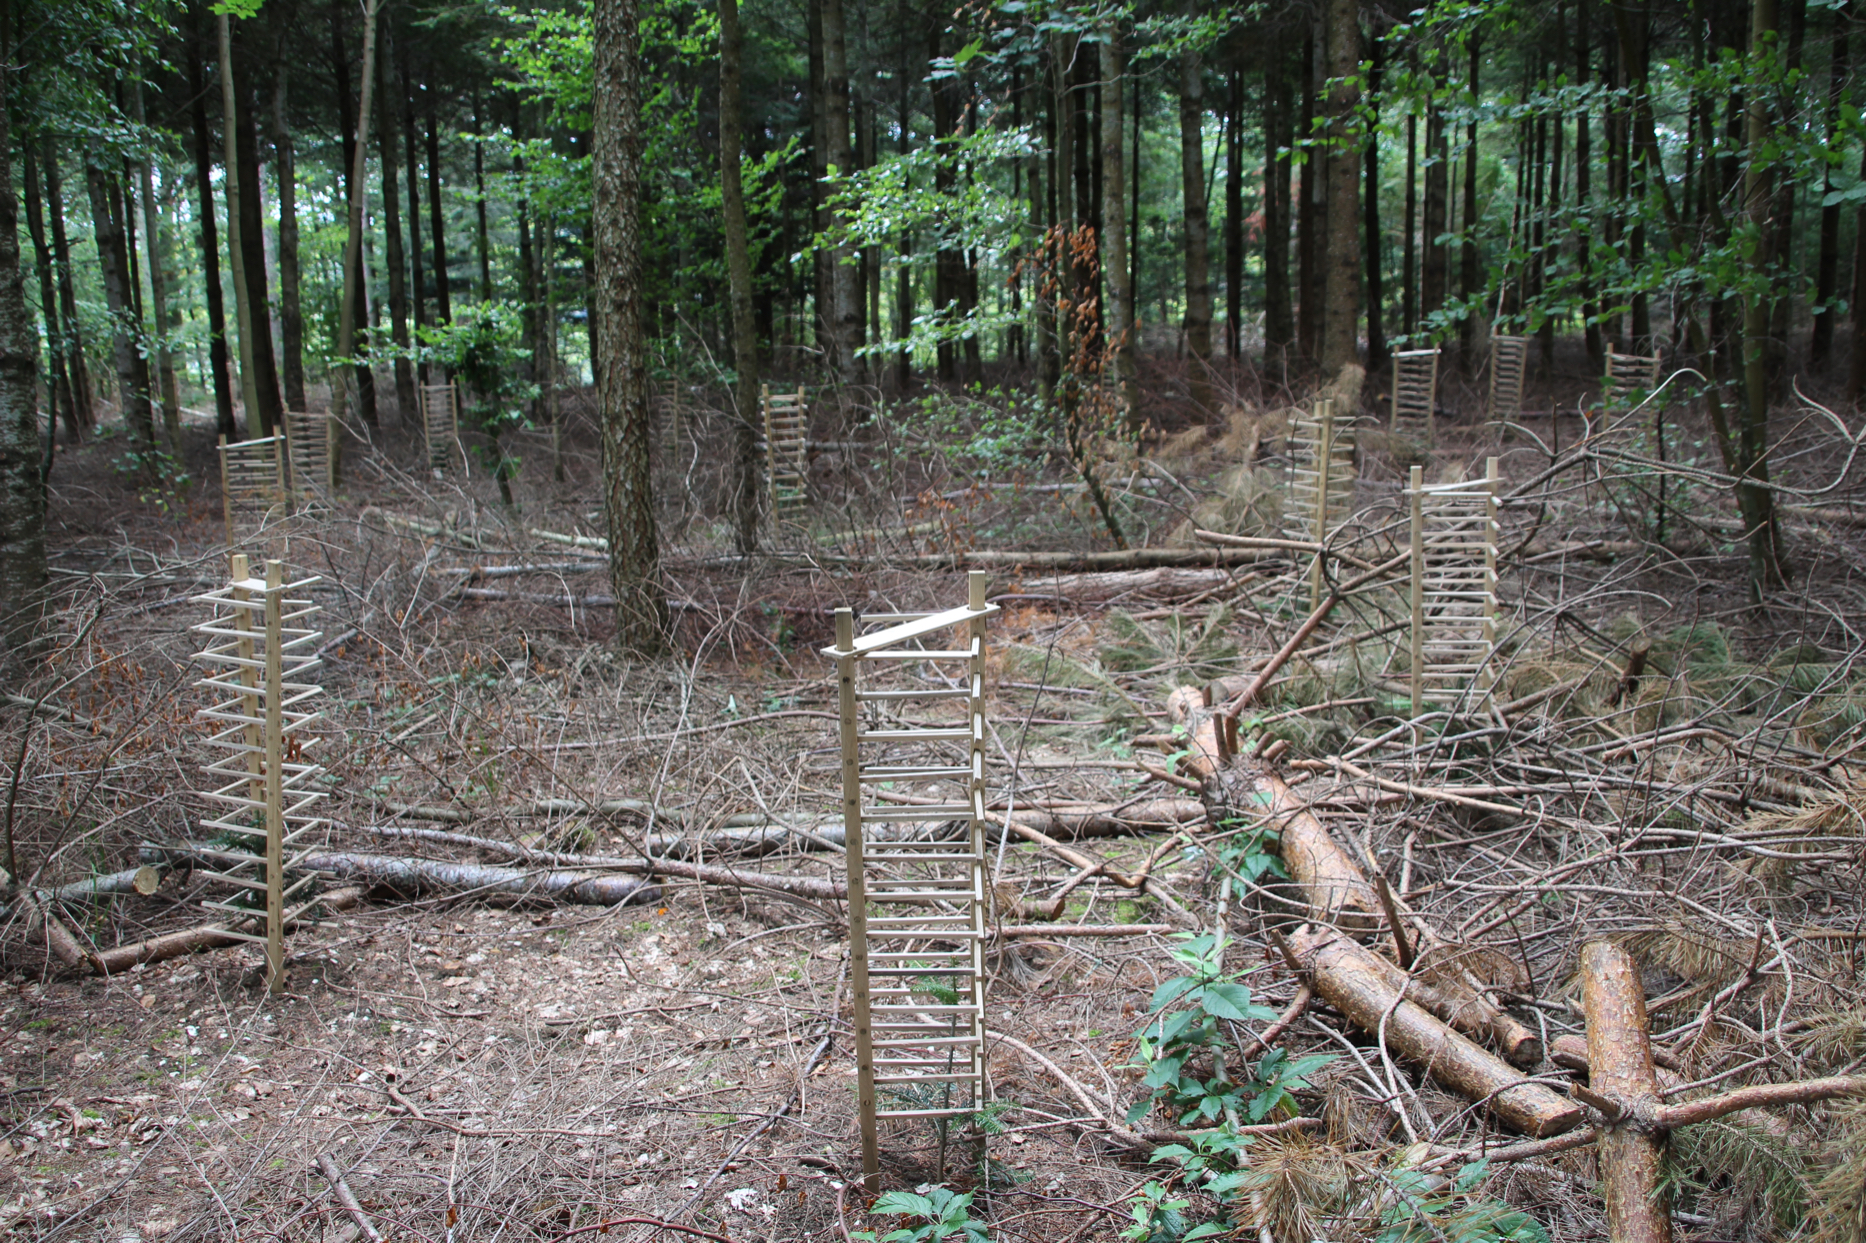 Some sapling protectors placed in a small patch of forest.